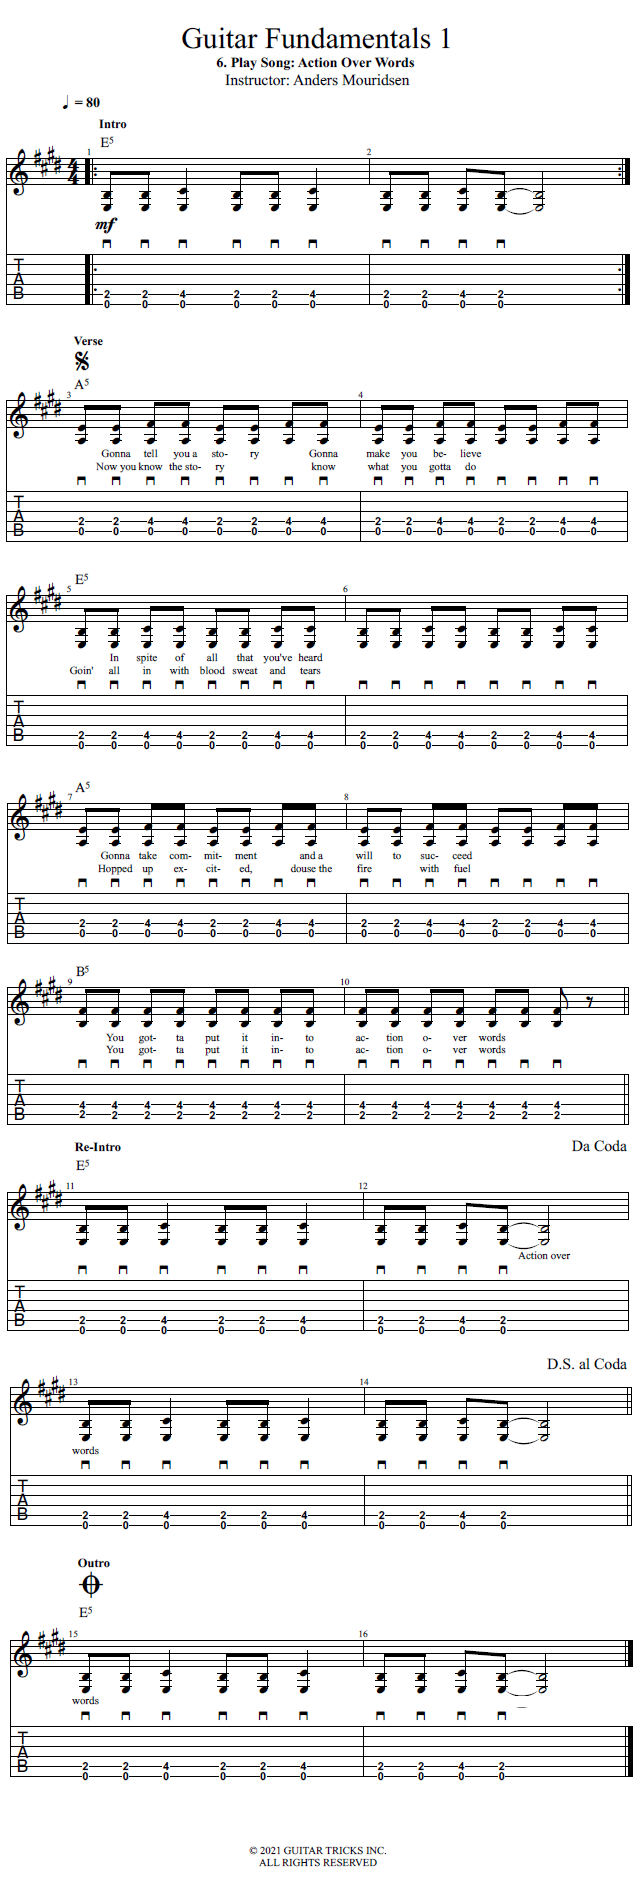 Play Song: Action Over Words song notation